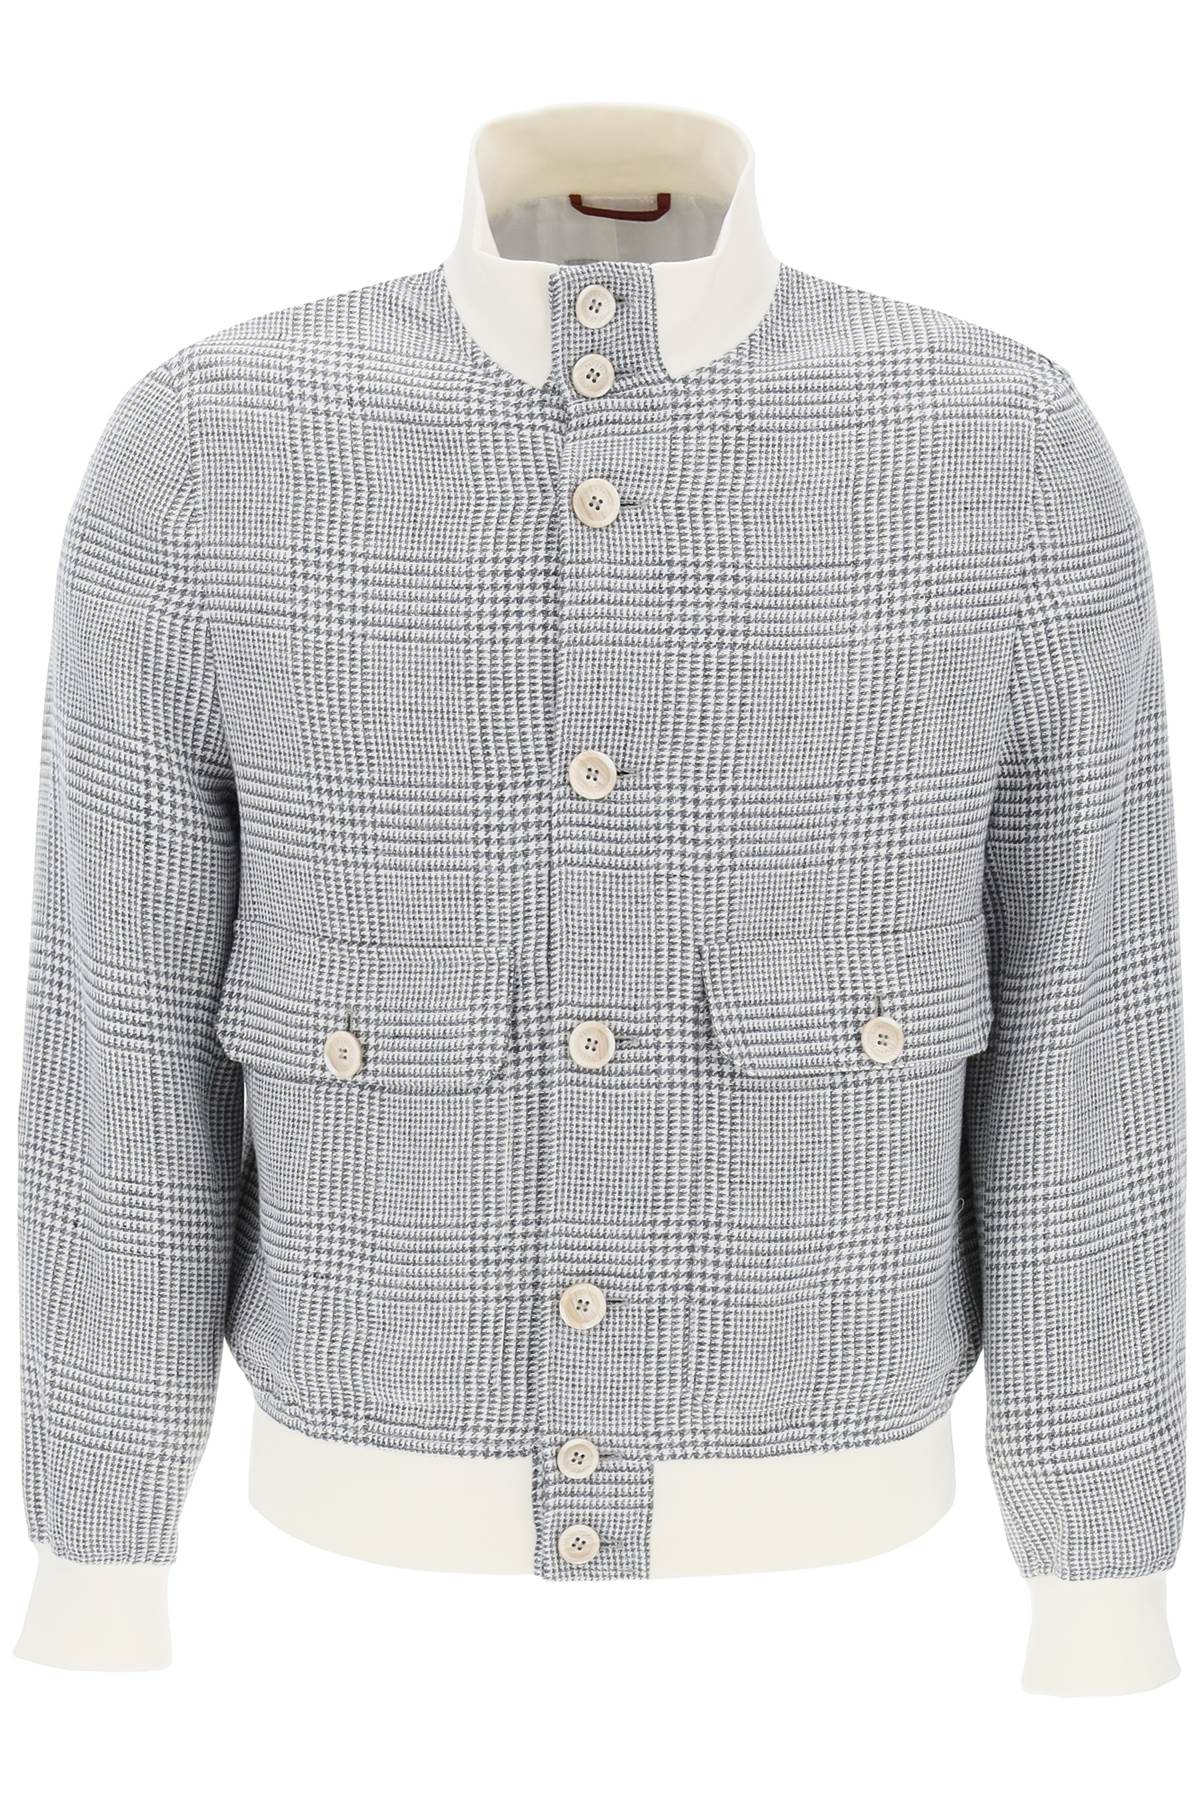 Brunello cucinelli prince of wales check bomber jacket-0